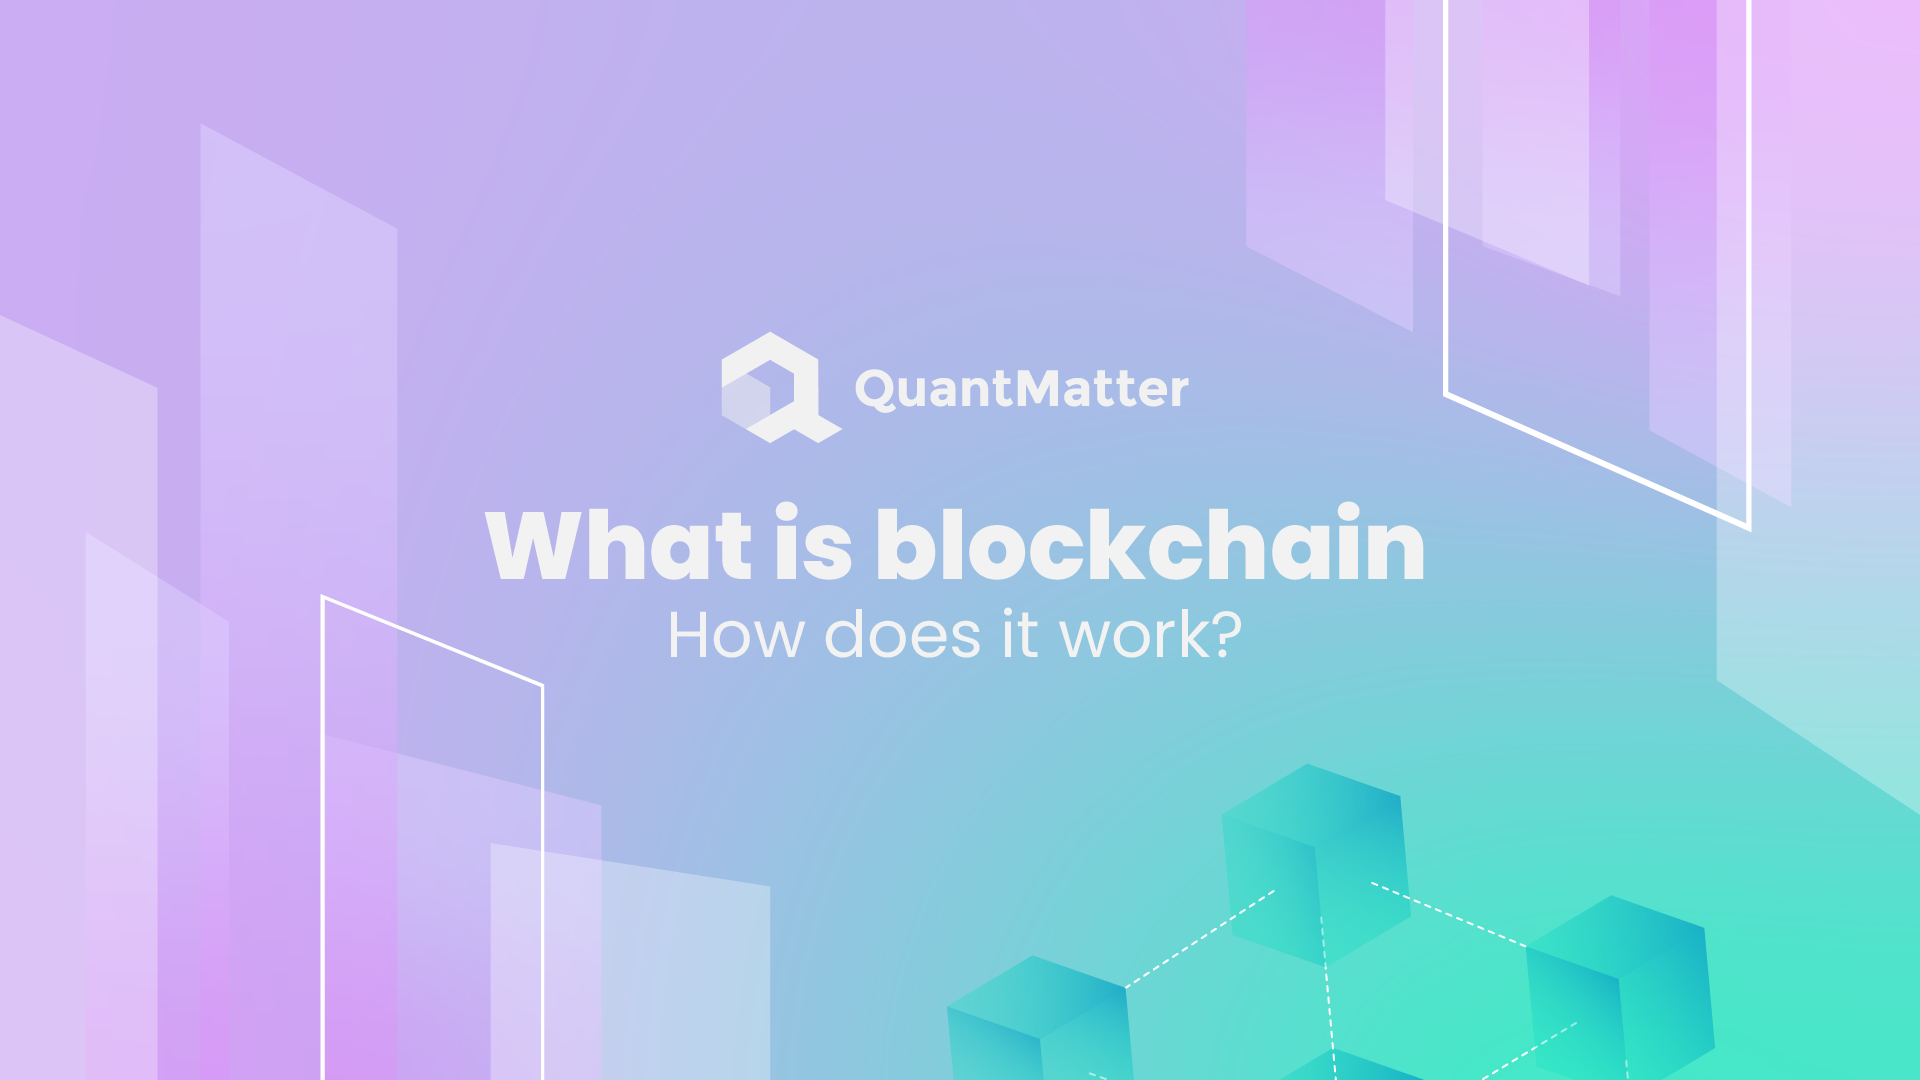 What is Blockchain and How does it work?